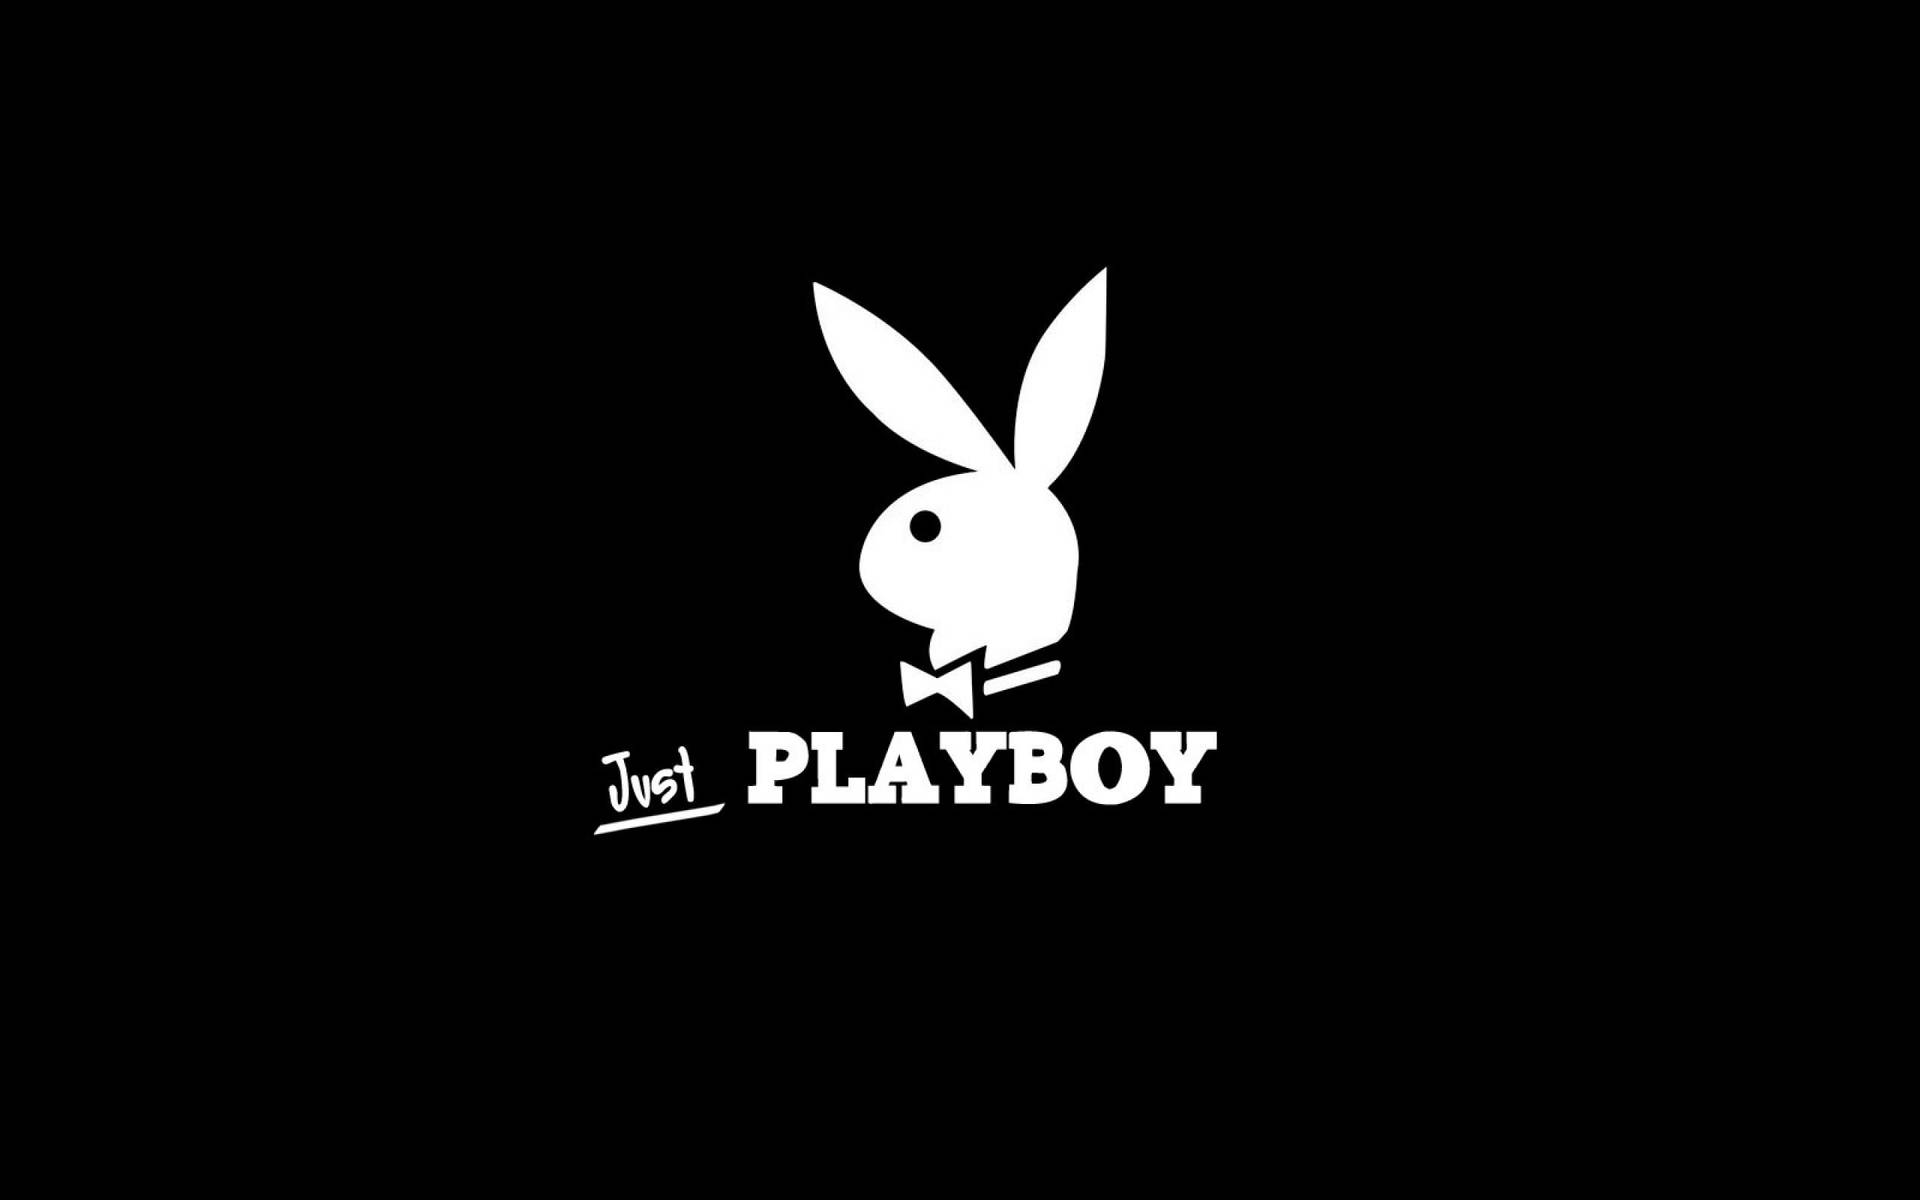 Top 999+ Playboy Logo Wallpapers Full HD, 4K✅Free to Use